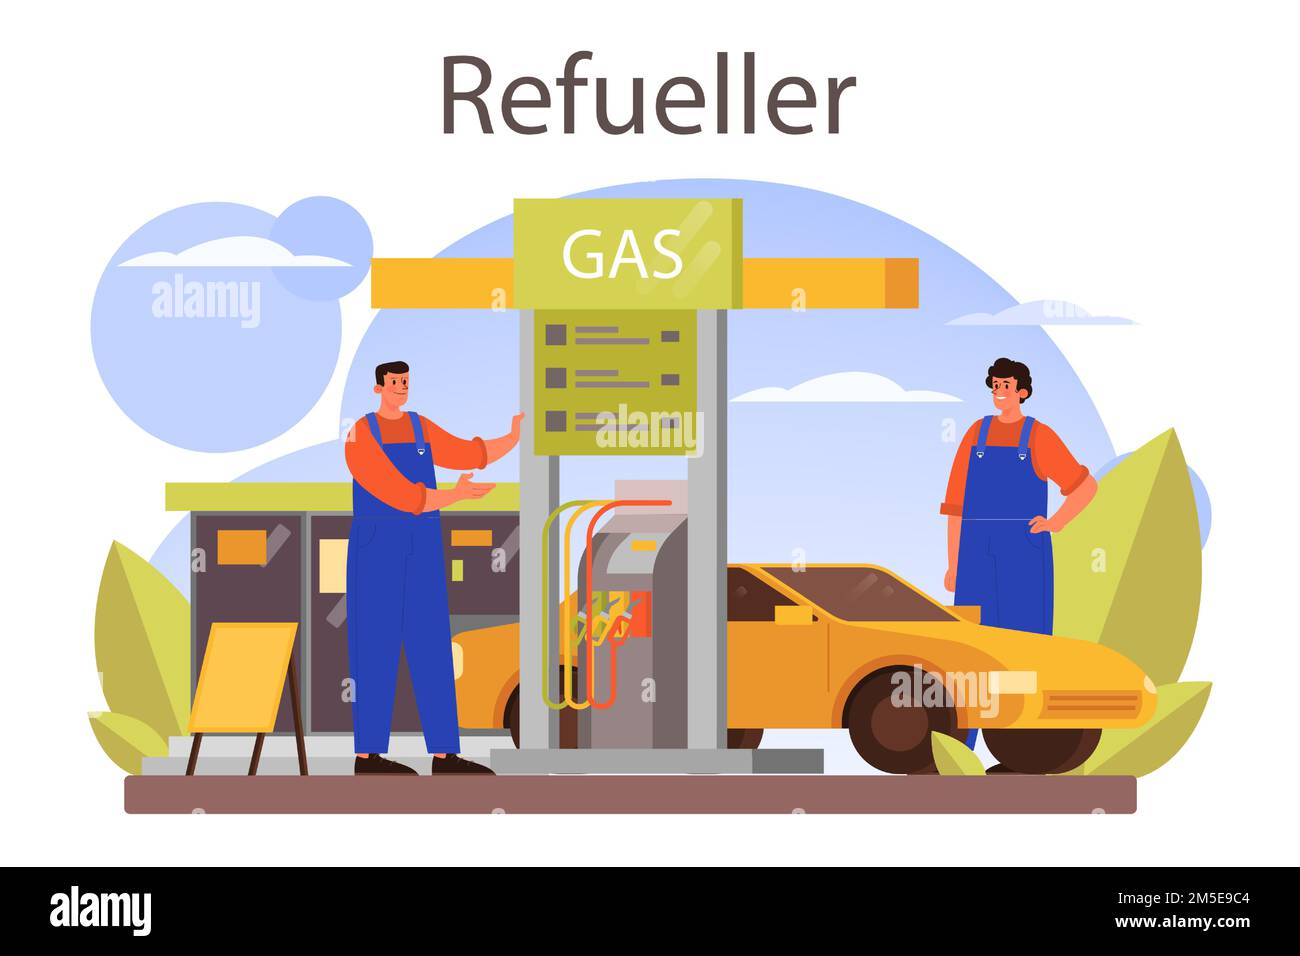 Refueler concept. Gas station worker in uniform working with a filling gun. Man pouring fuel into car in petroleum station. Isolated vector illustrati Stock Vector